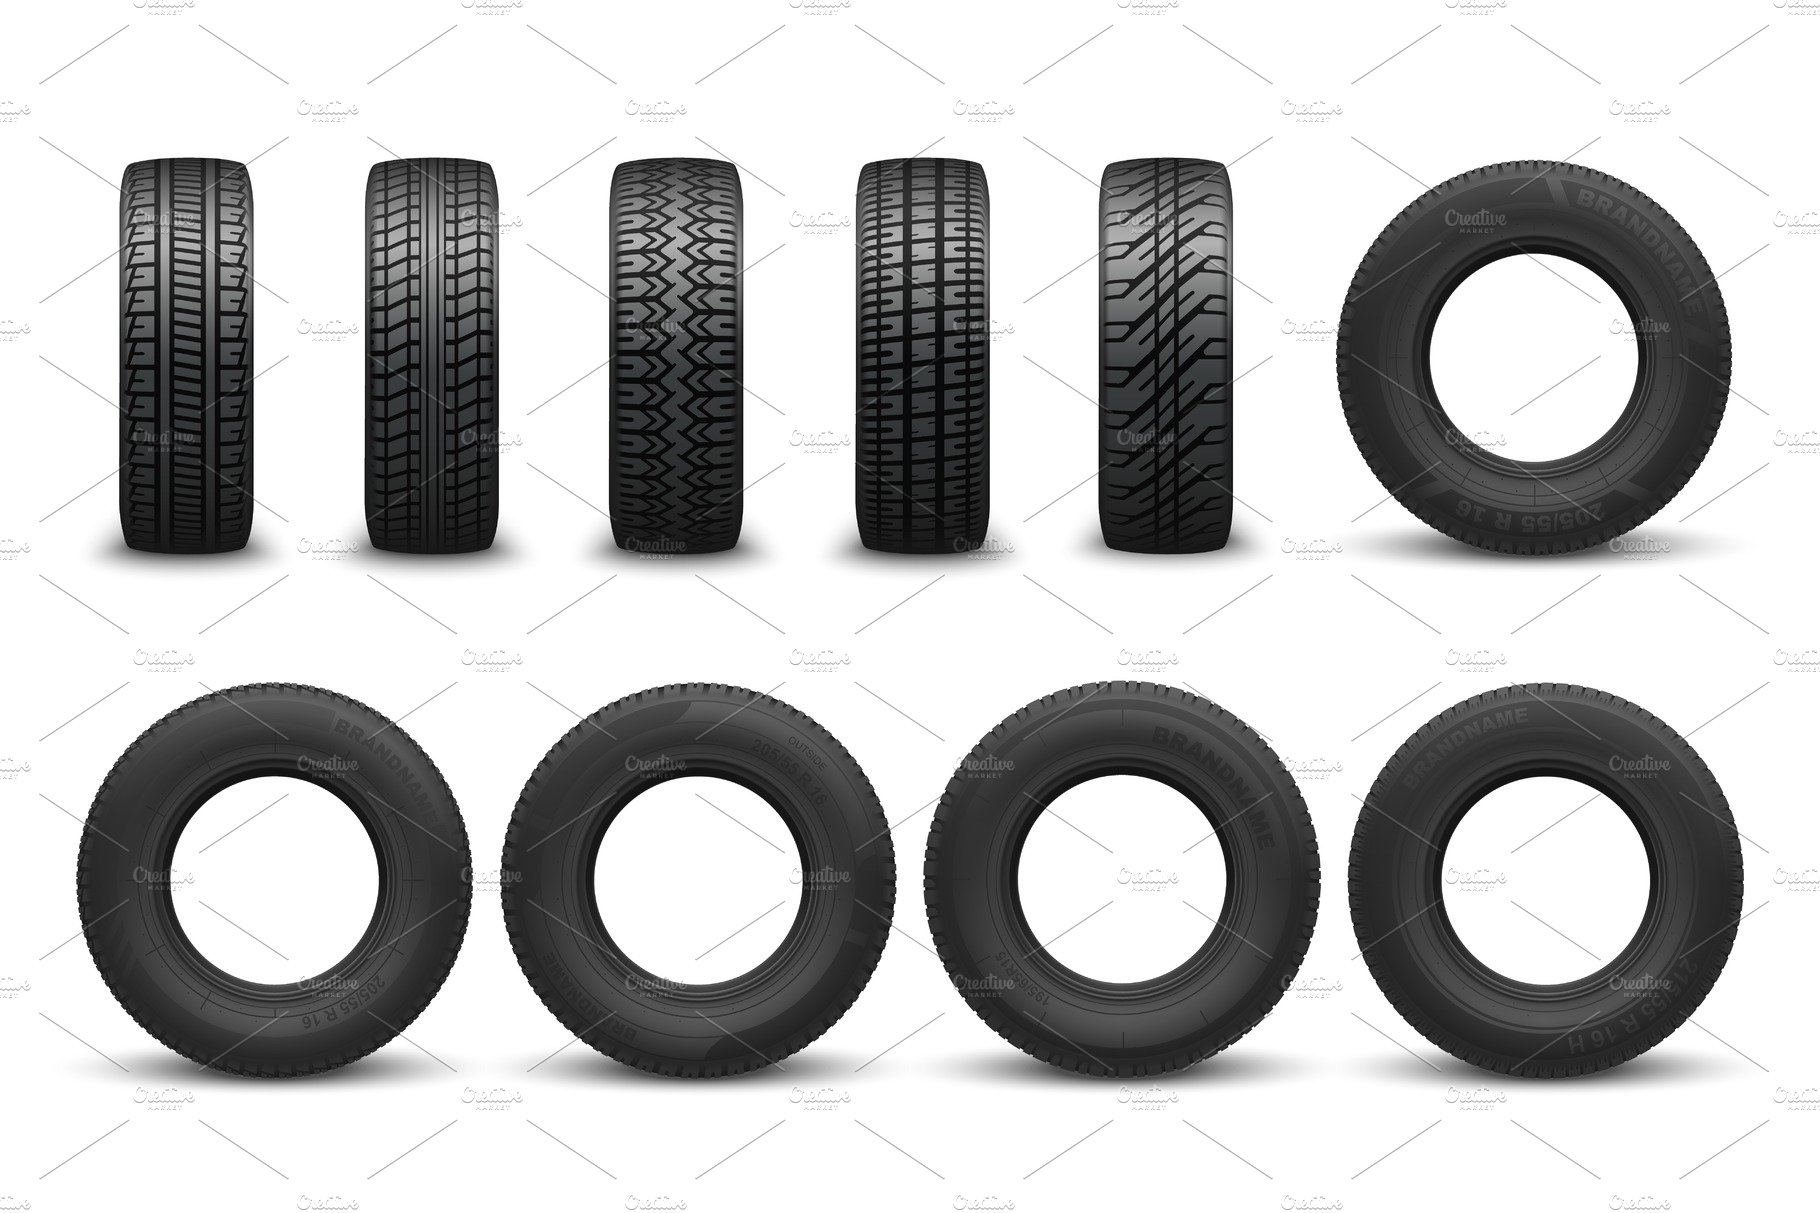 Types of tire with tread patterns cover image.